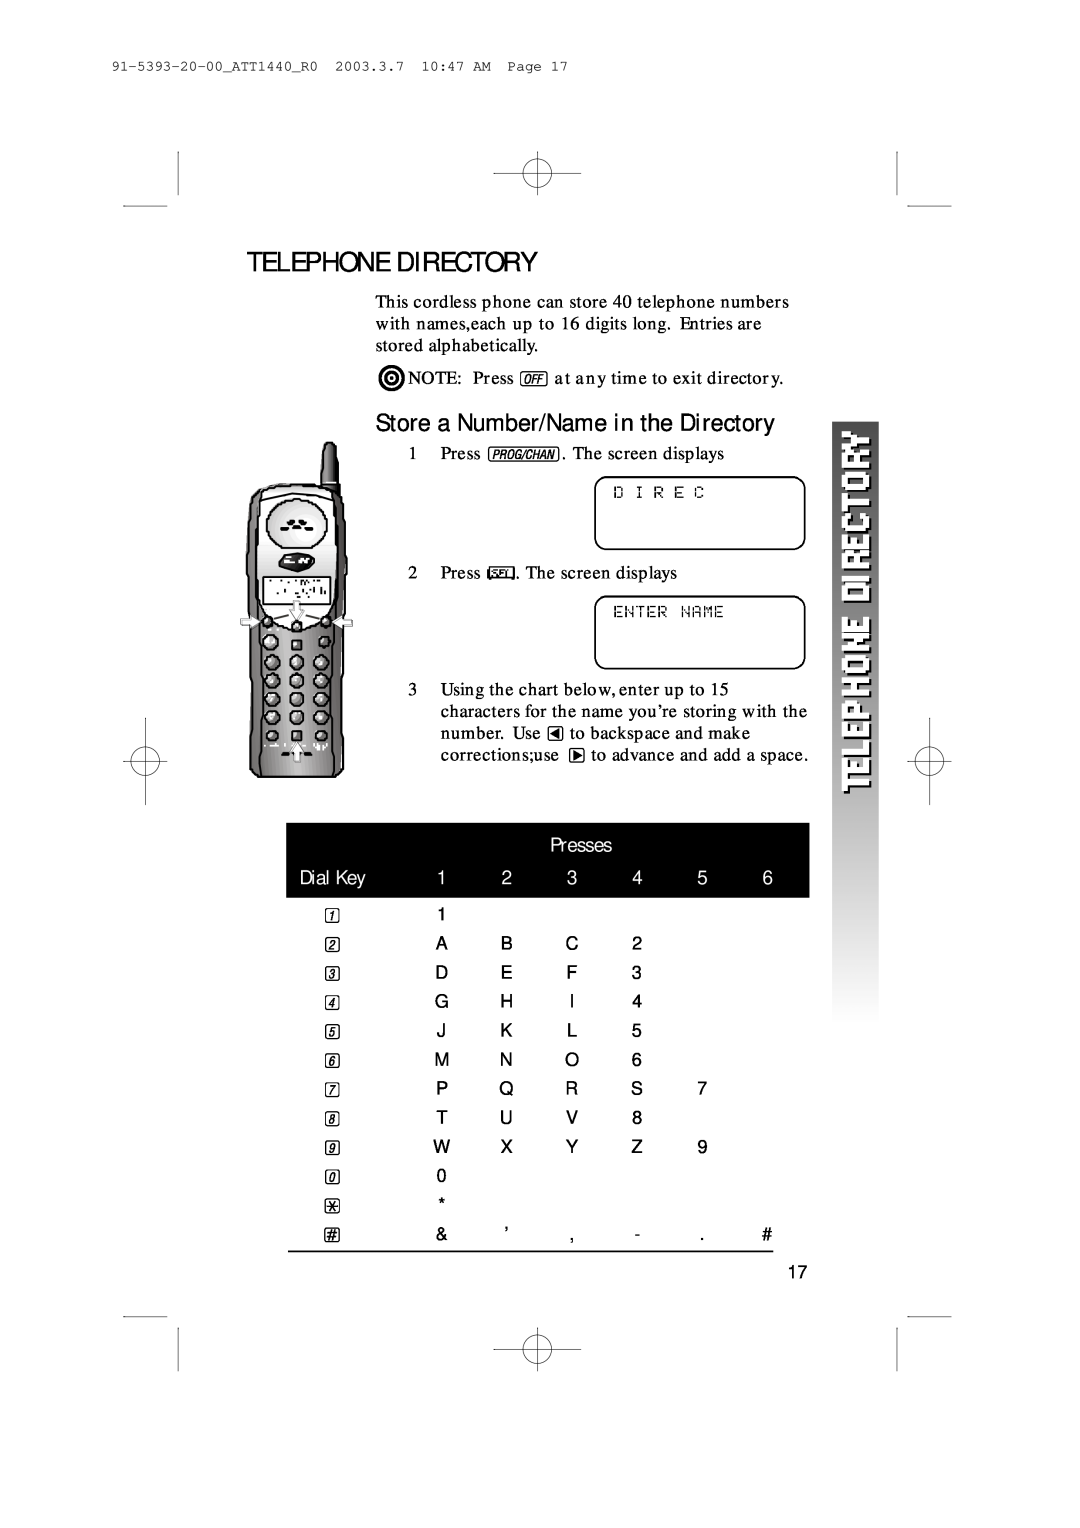 AT&T 1440 Telephone Directory, Store a Number/Name in the Directory, ¥NOTE Press at any time to exit directory, Dial Key 